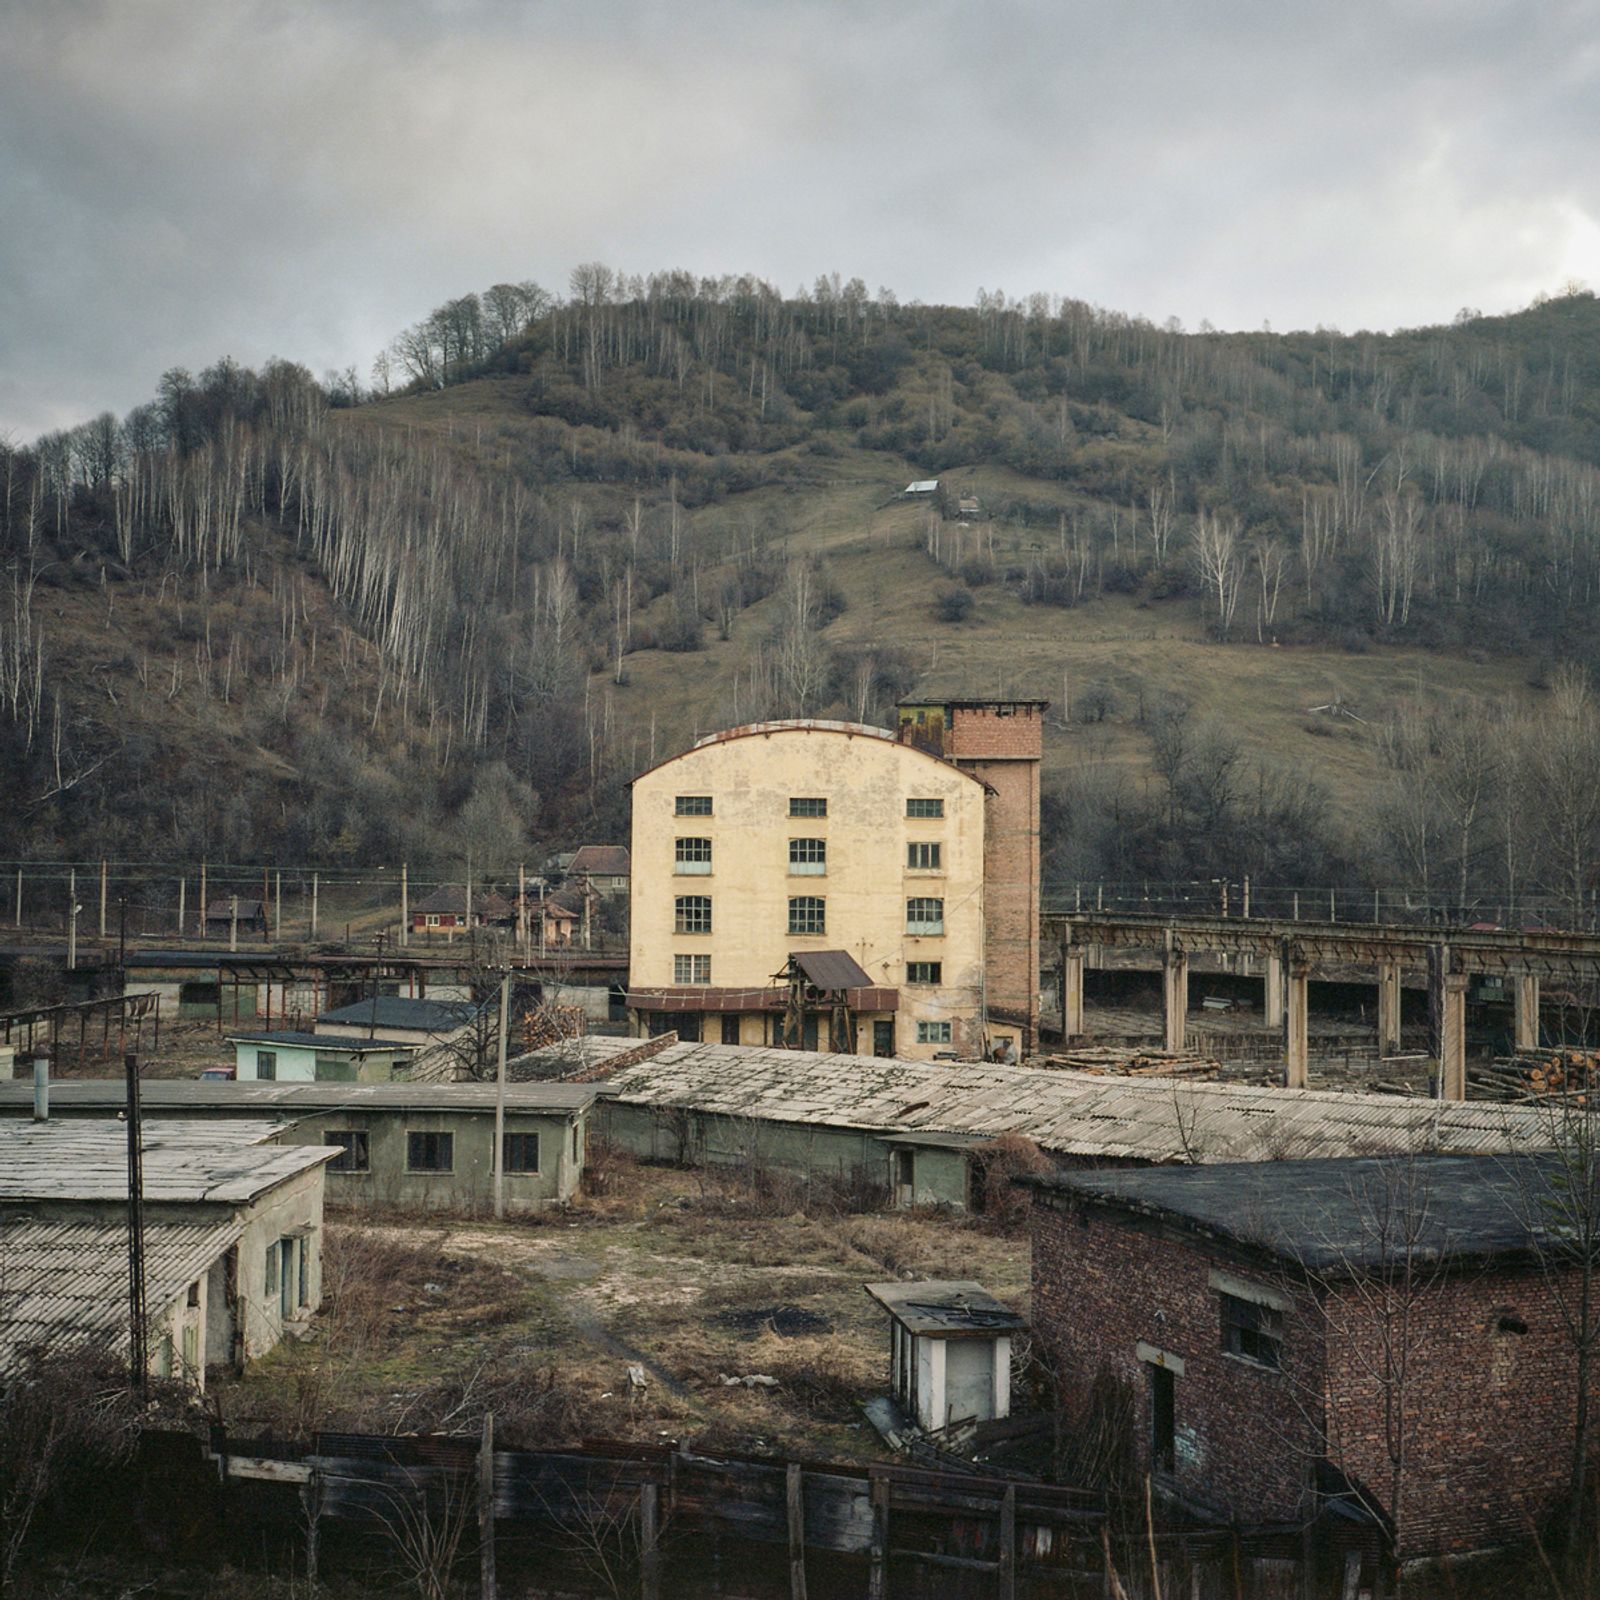 © Ioana Cirlig - Image from the Post-industrial stories photography project